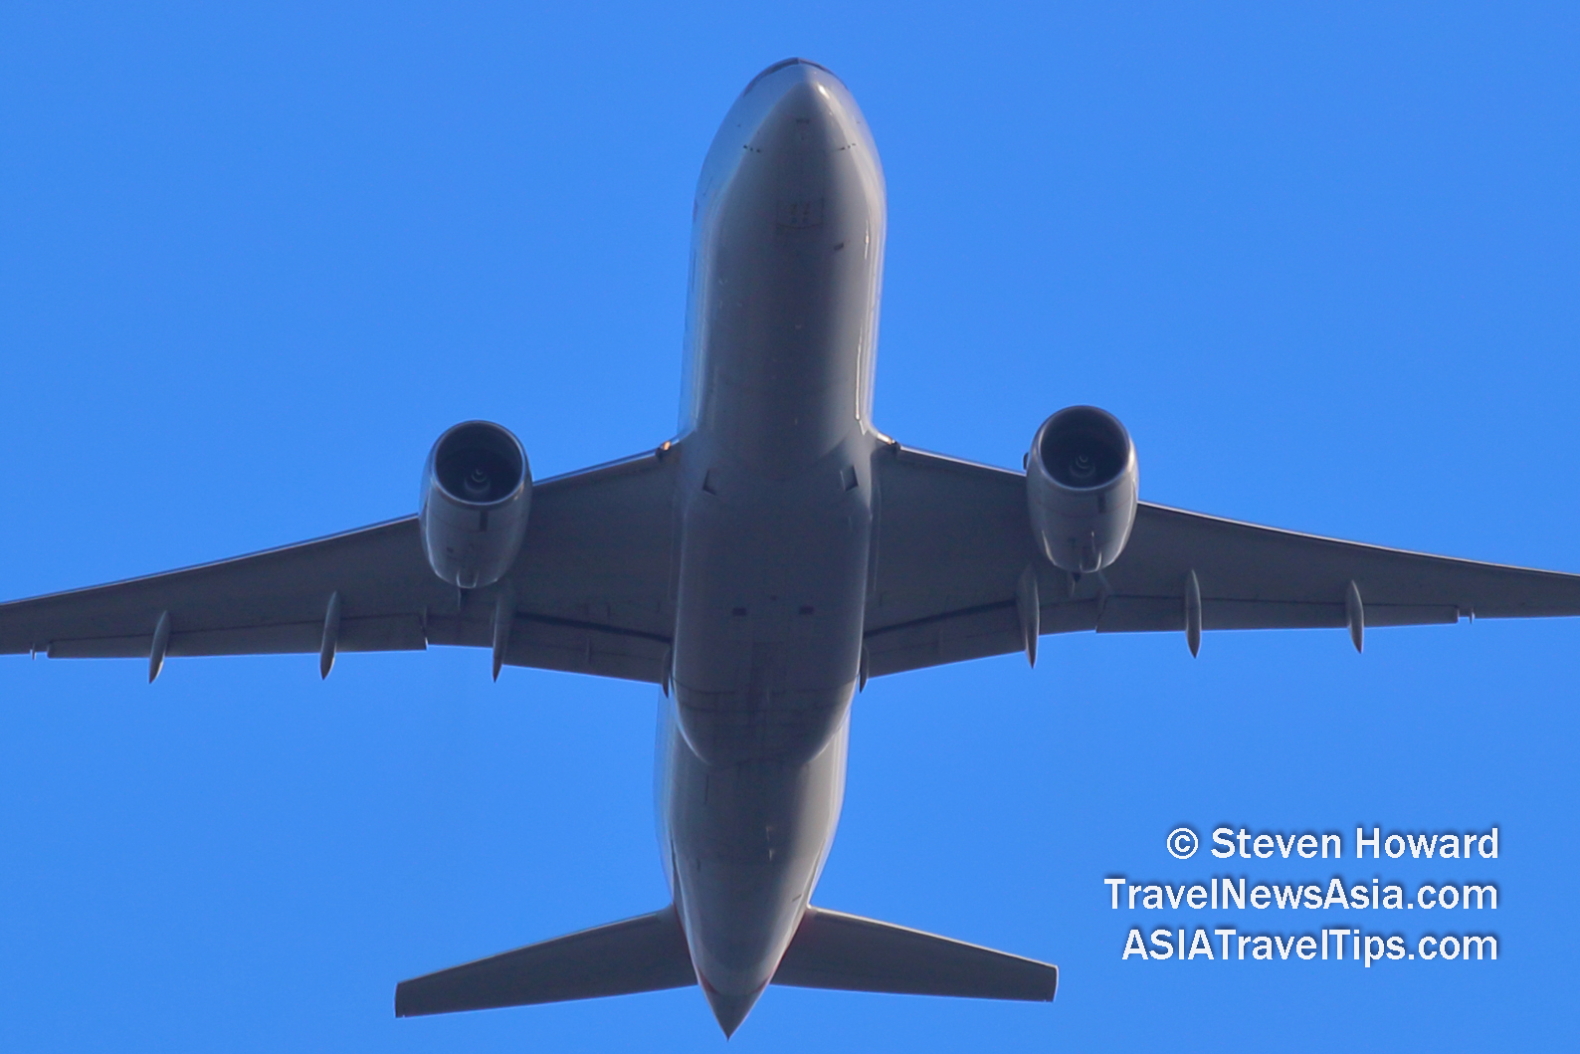 A320 flying overhead. Picture by Steven Howard of TravelNewsAsia.com Click to enlarge.